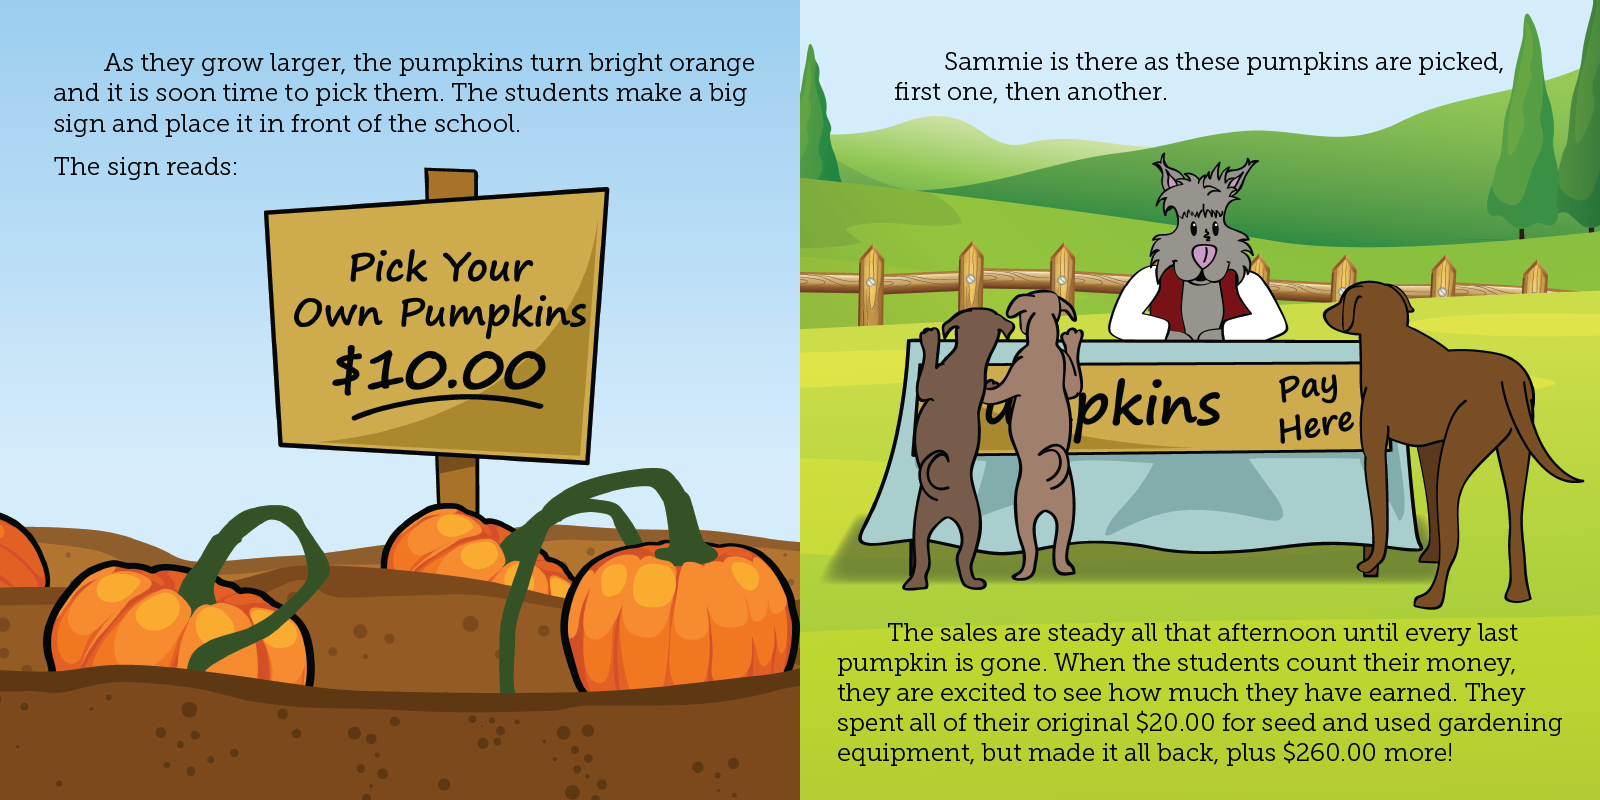 Slide 10 of the Sammie and the Pumpkin Patch E-book